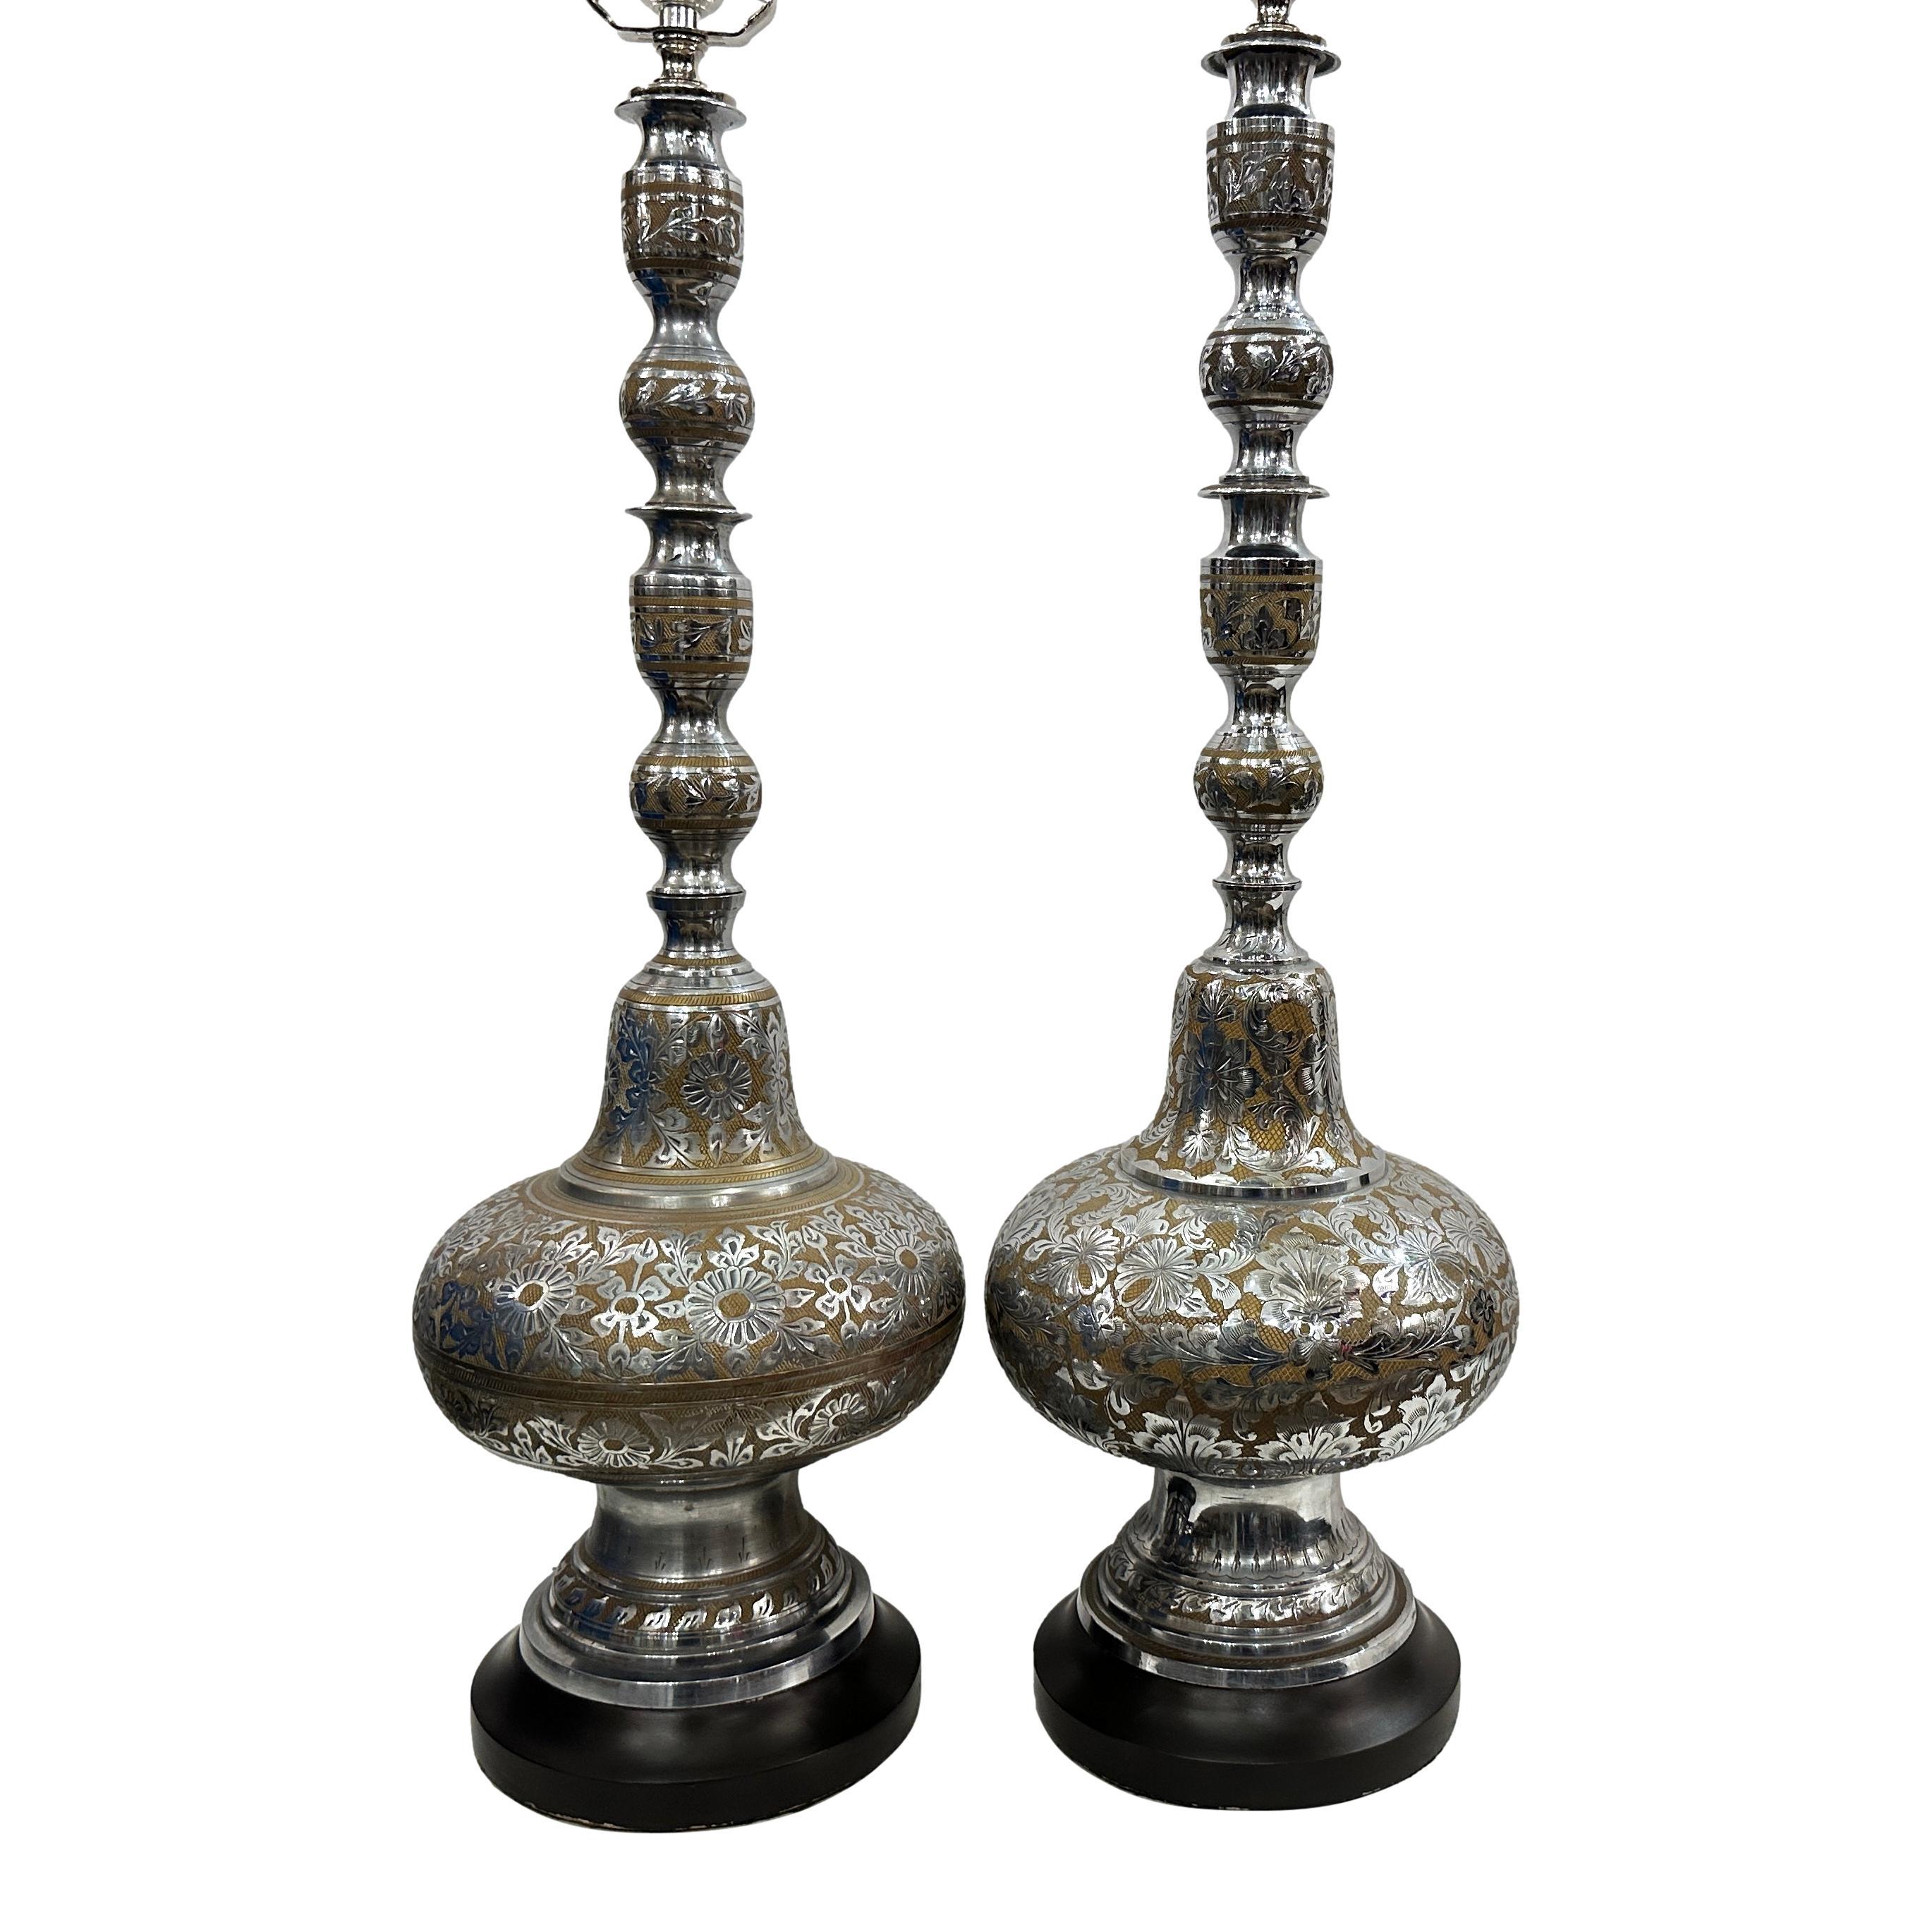 Pair of circa 1960's Persian table lamps with etched floral decoration.

Measurements:
Height of body: 25